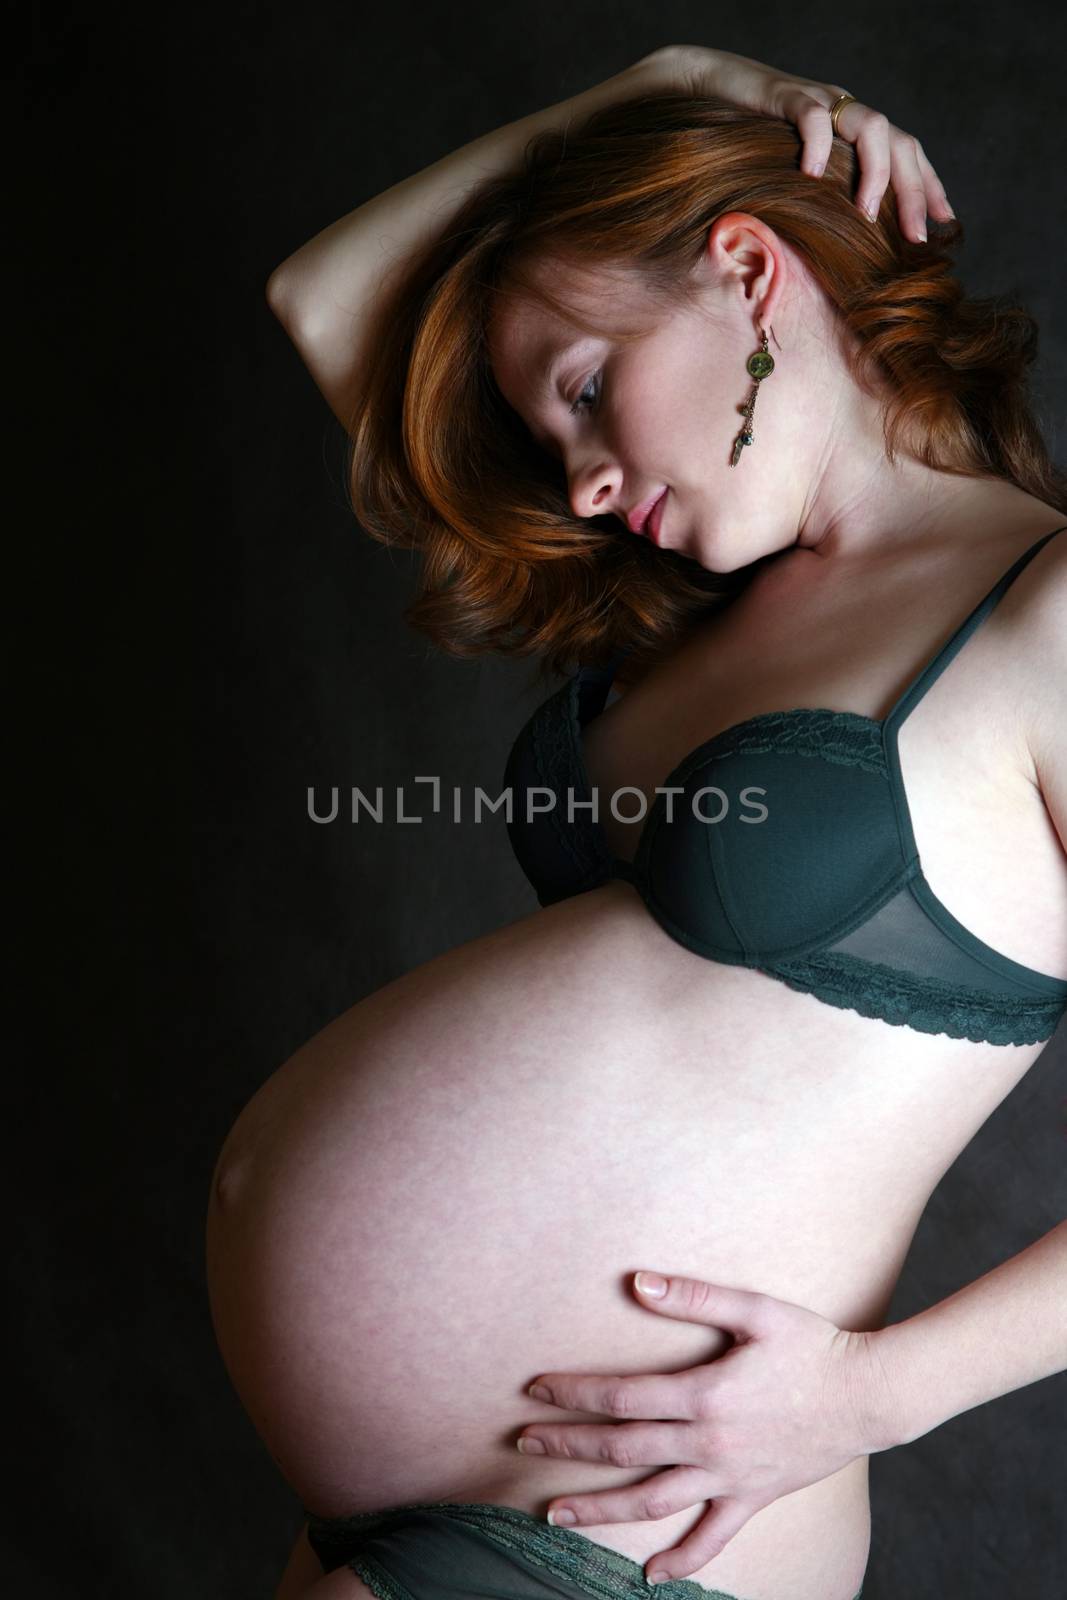 The pregnant woman on the ninth month. 